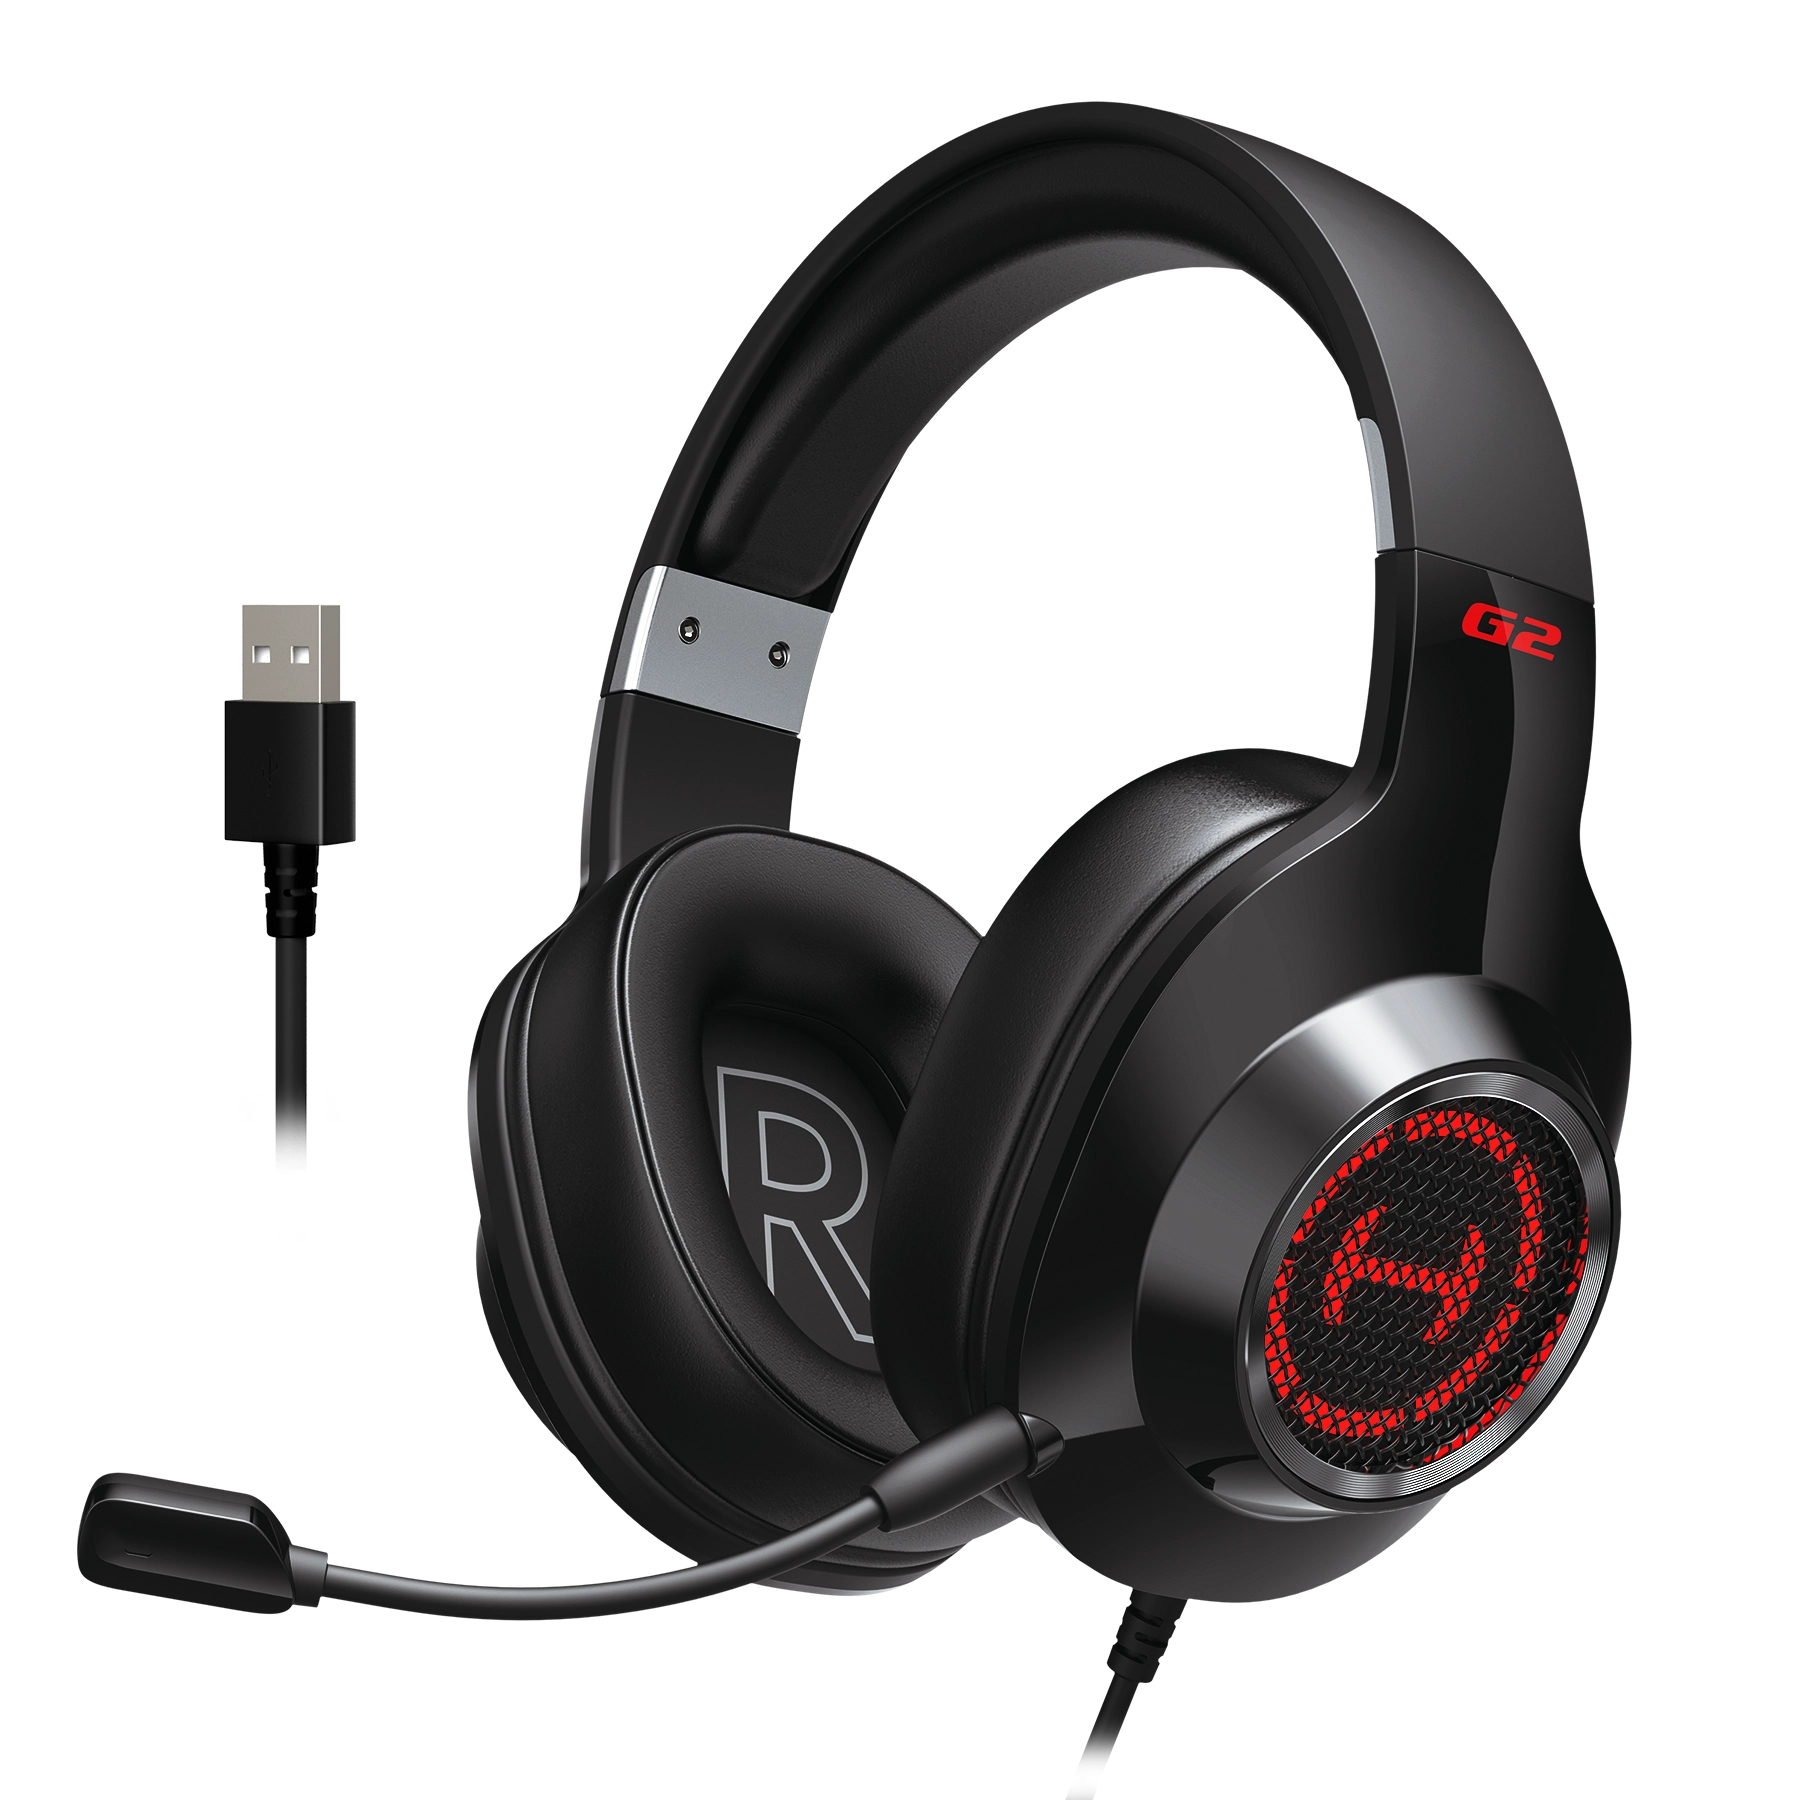 g2Ⅱ_headset product pictures black_